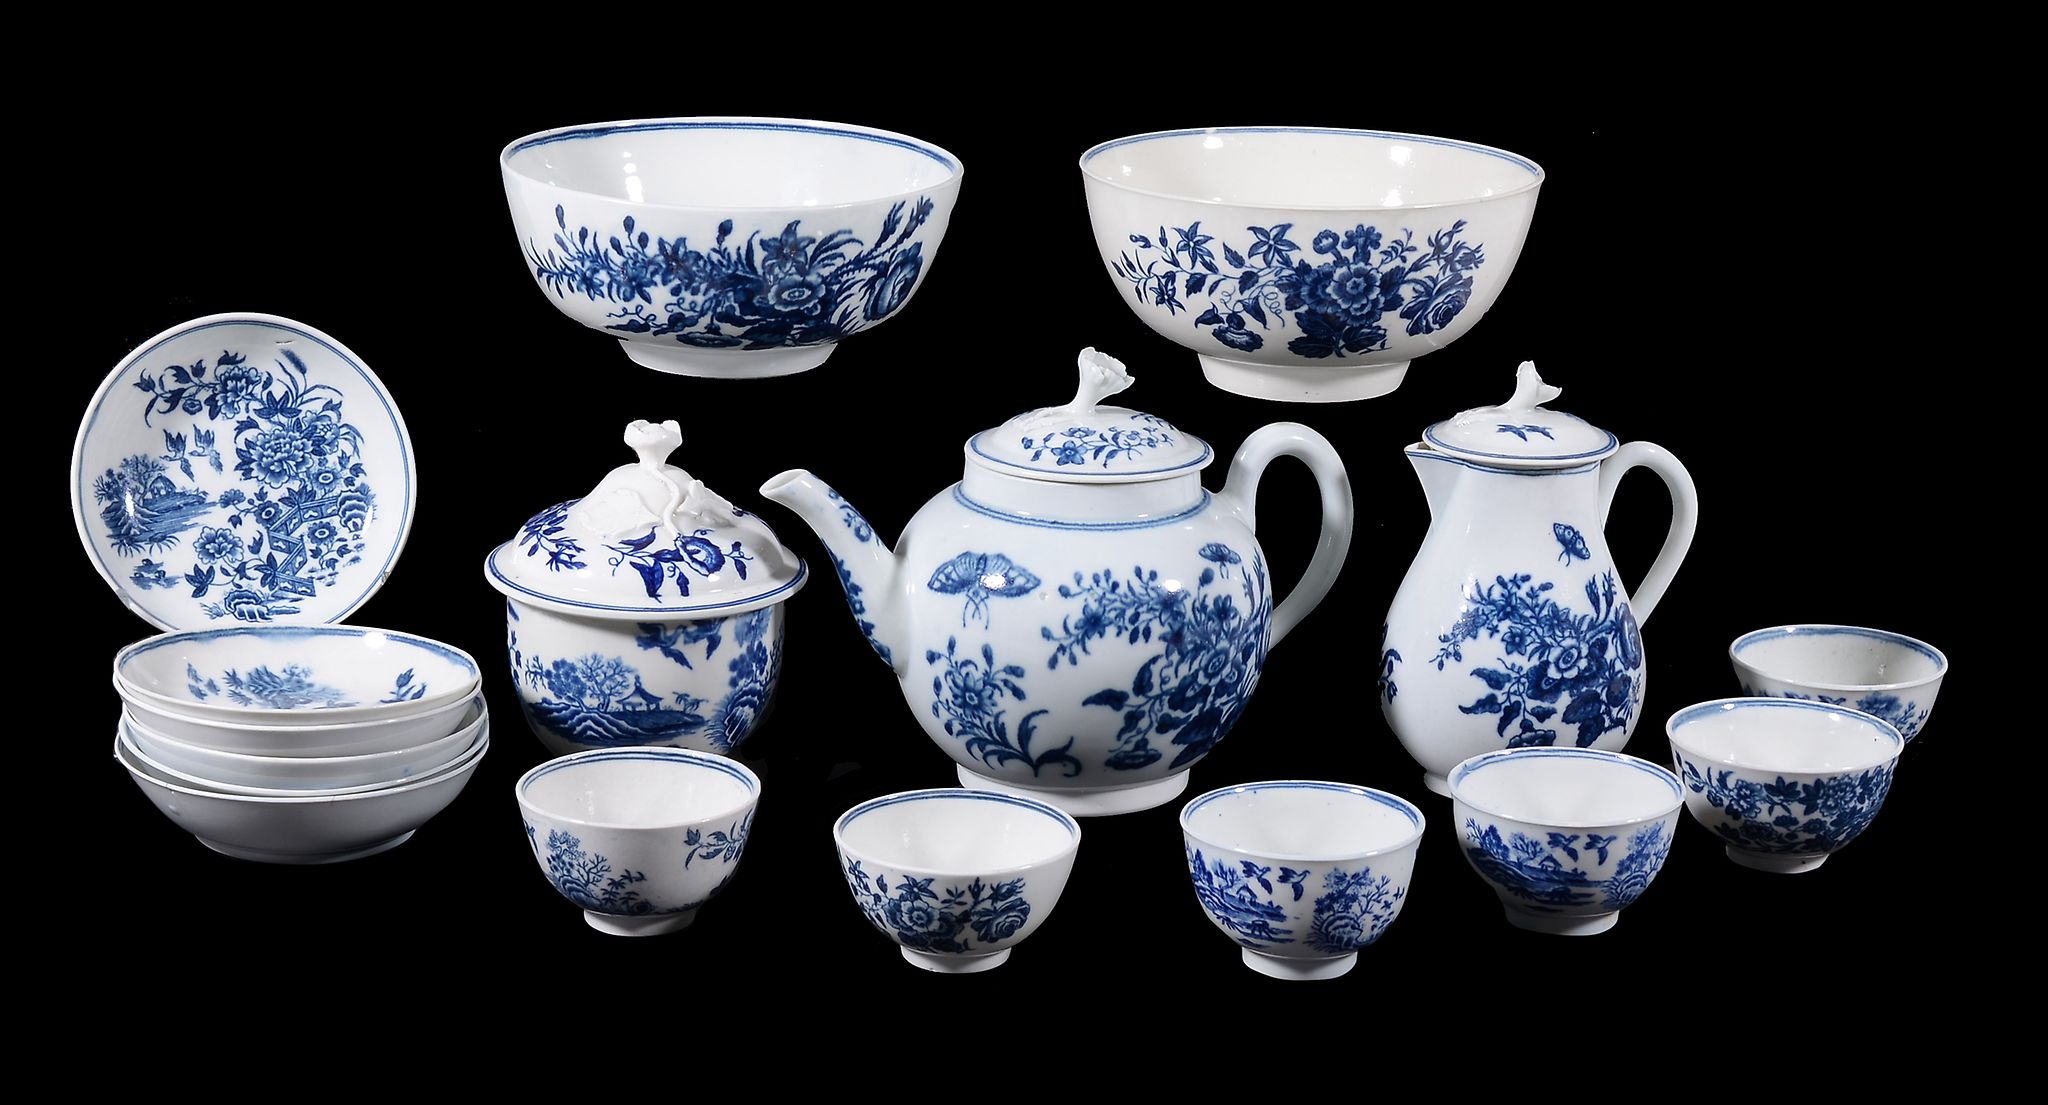 A selection of Worcester blue and white printed porcelain, circa 1785